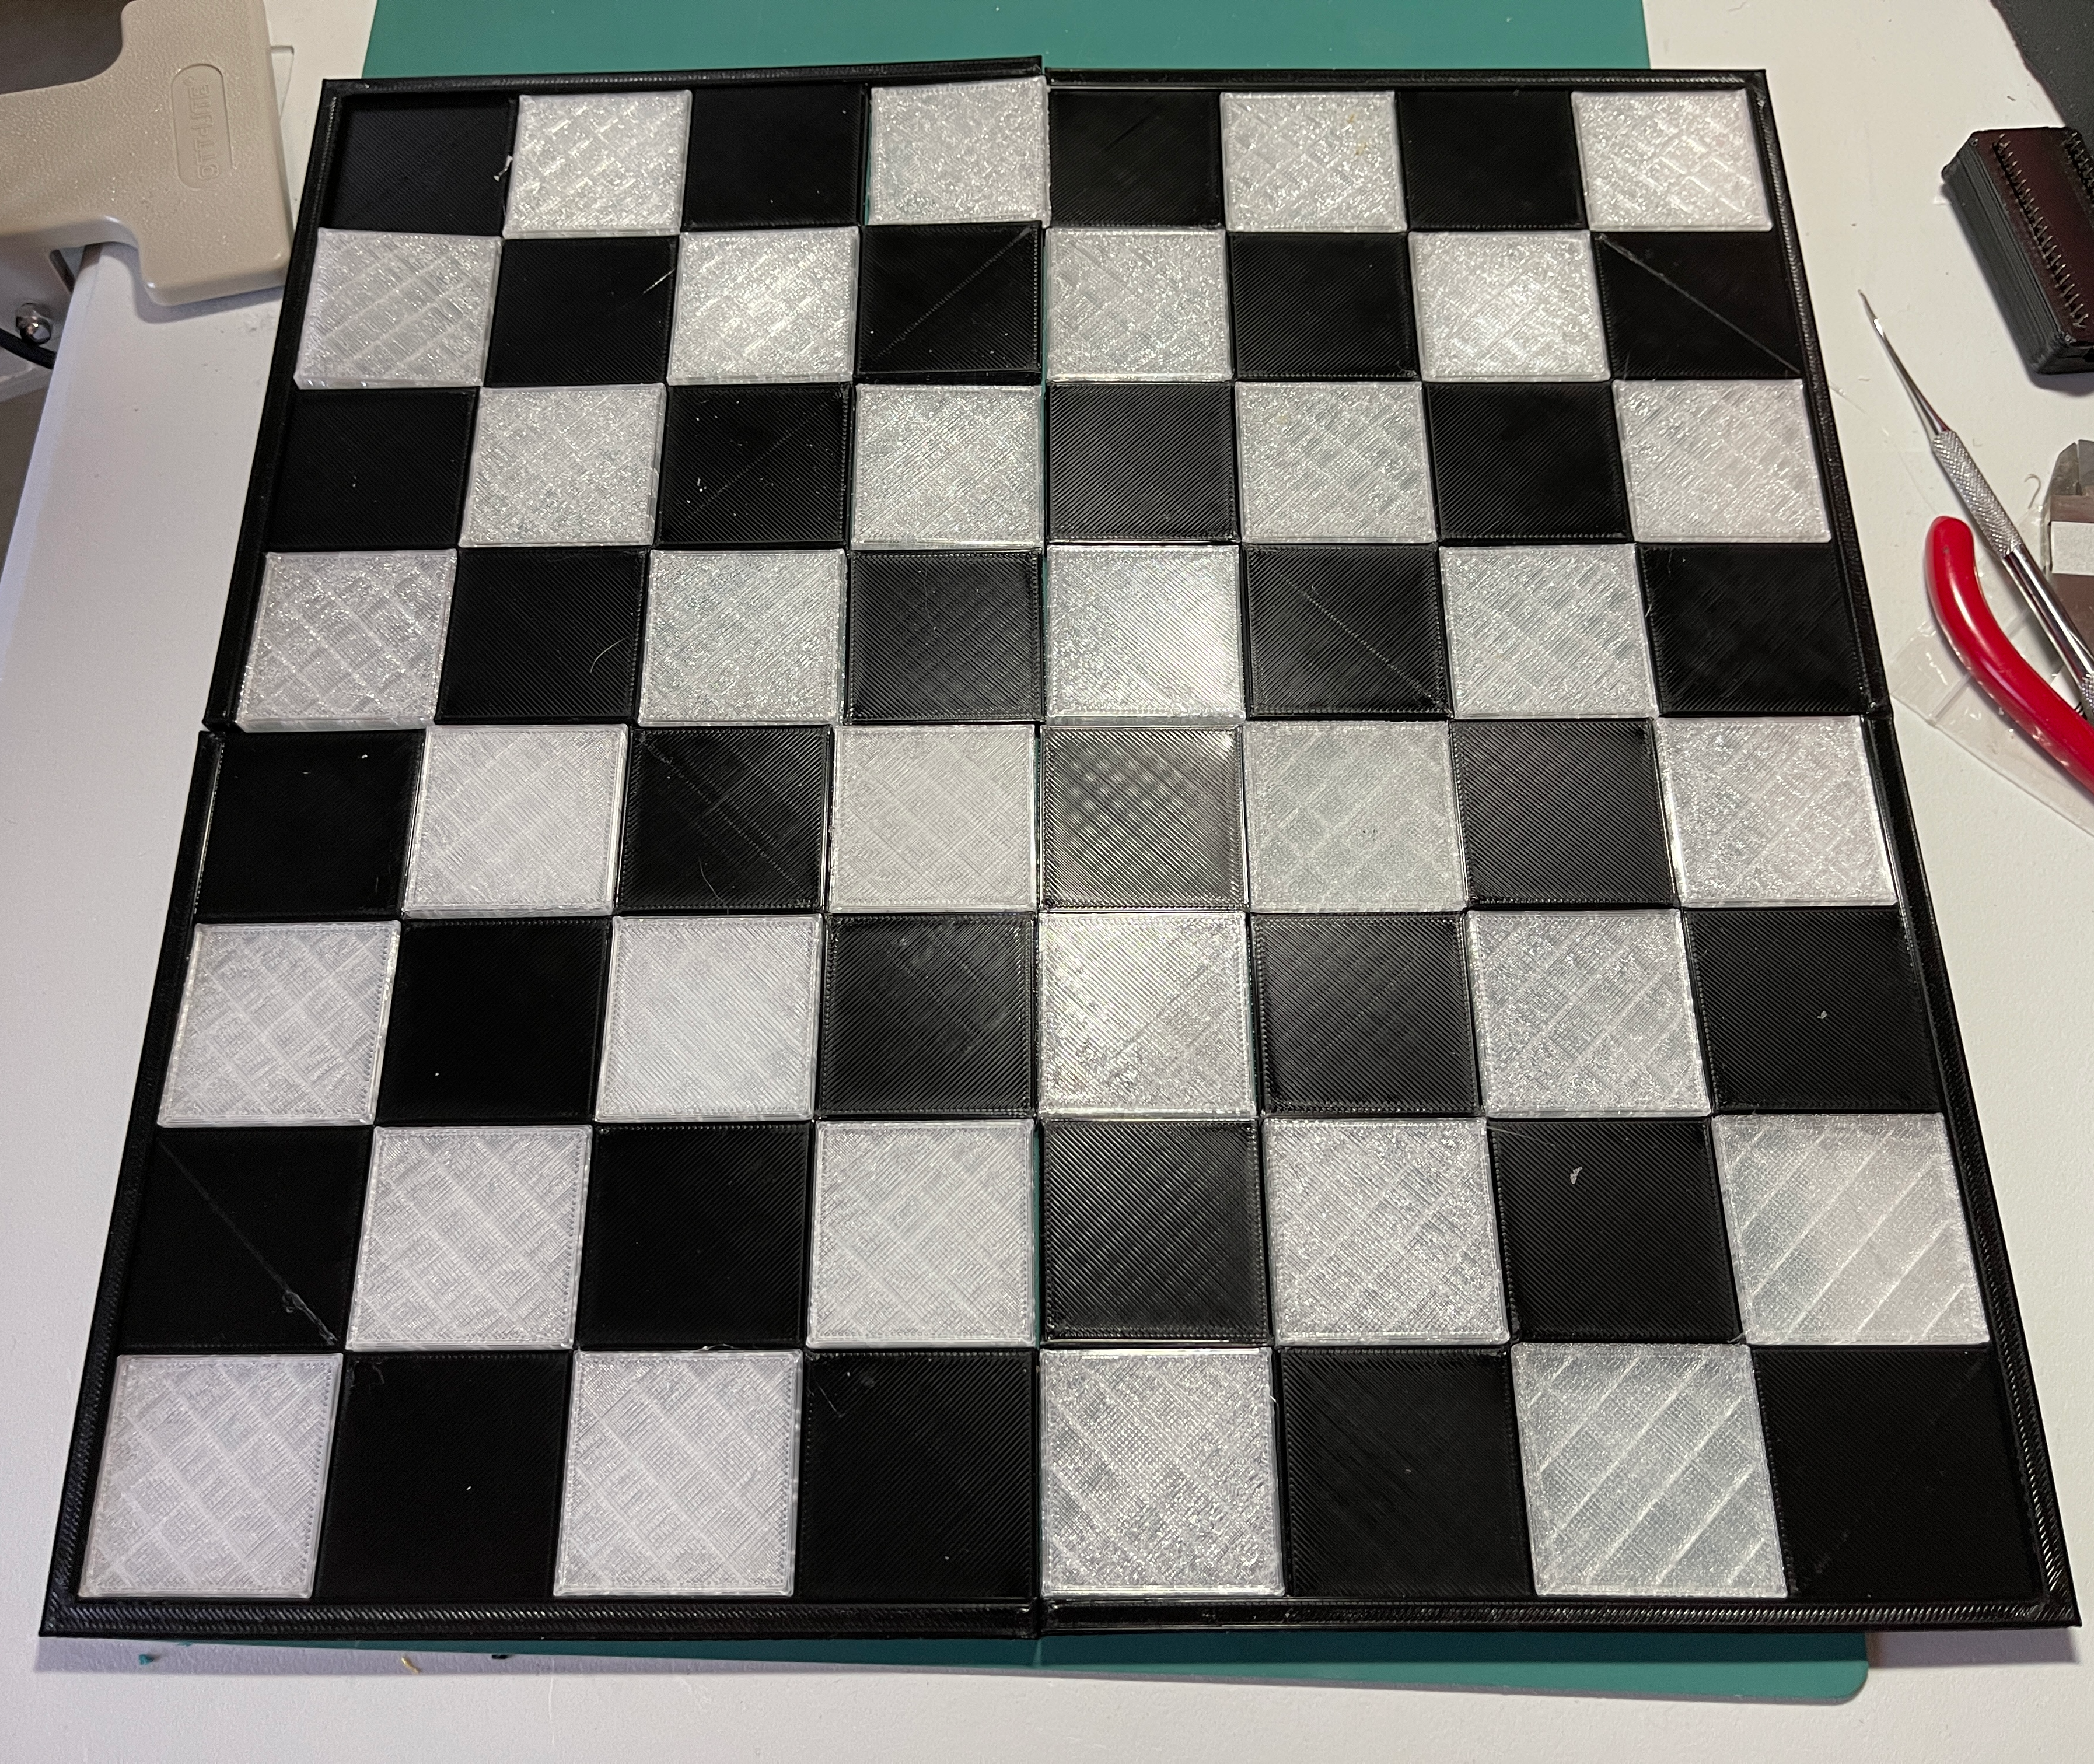 Chess Board to print on small printer